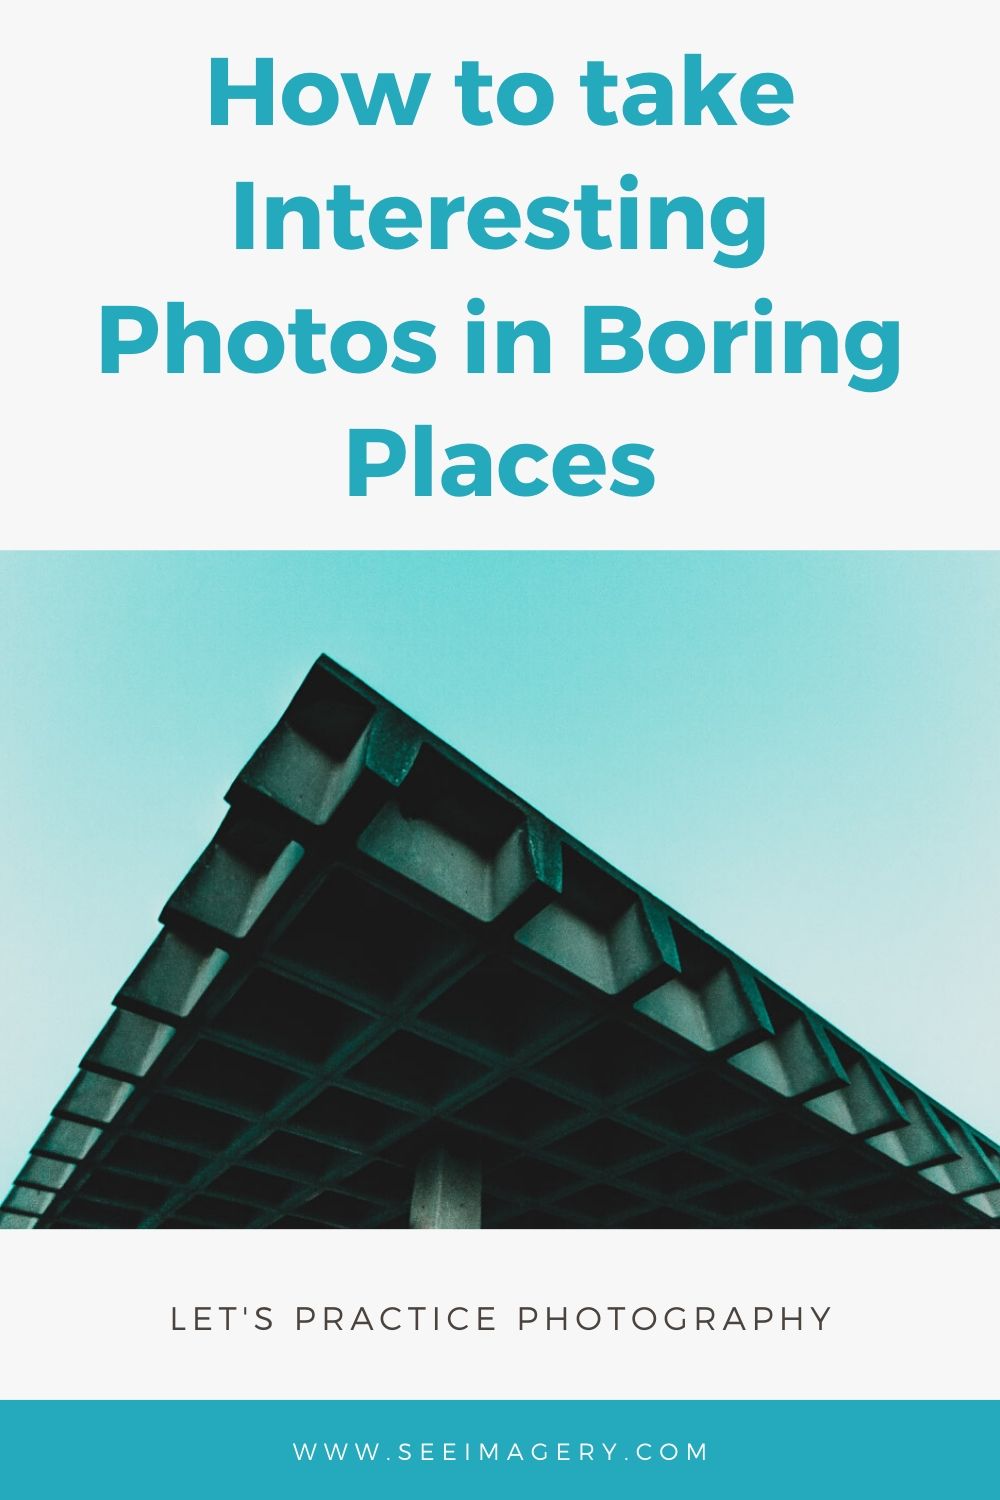 How to take interesting photos in boring places